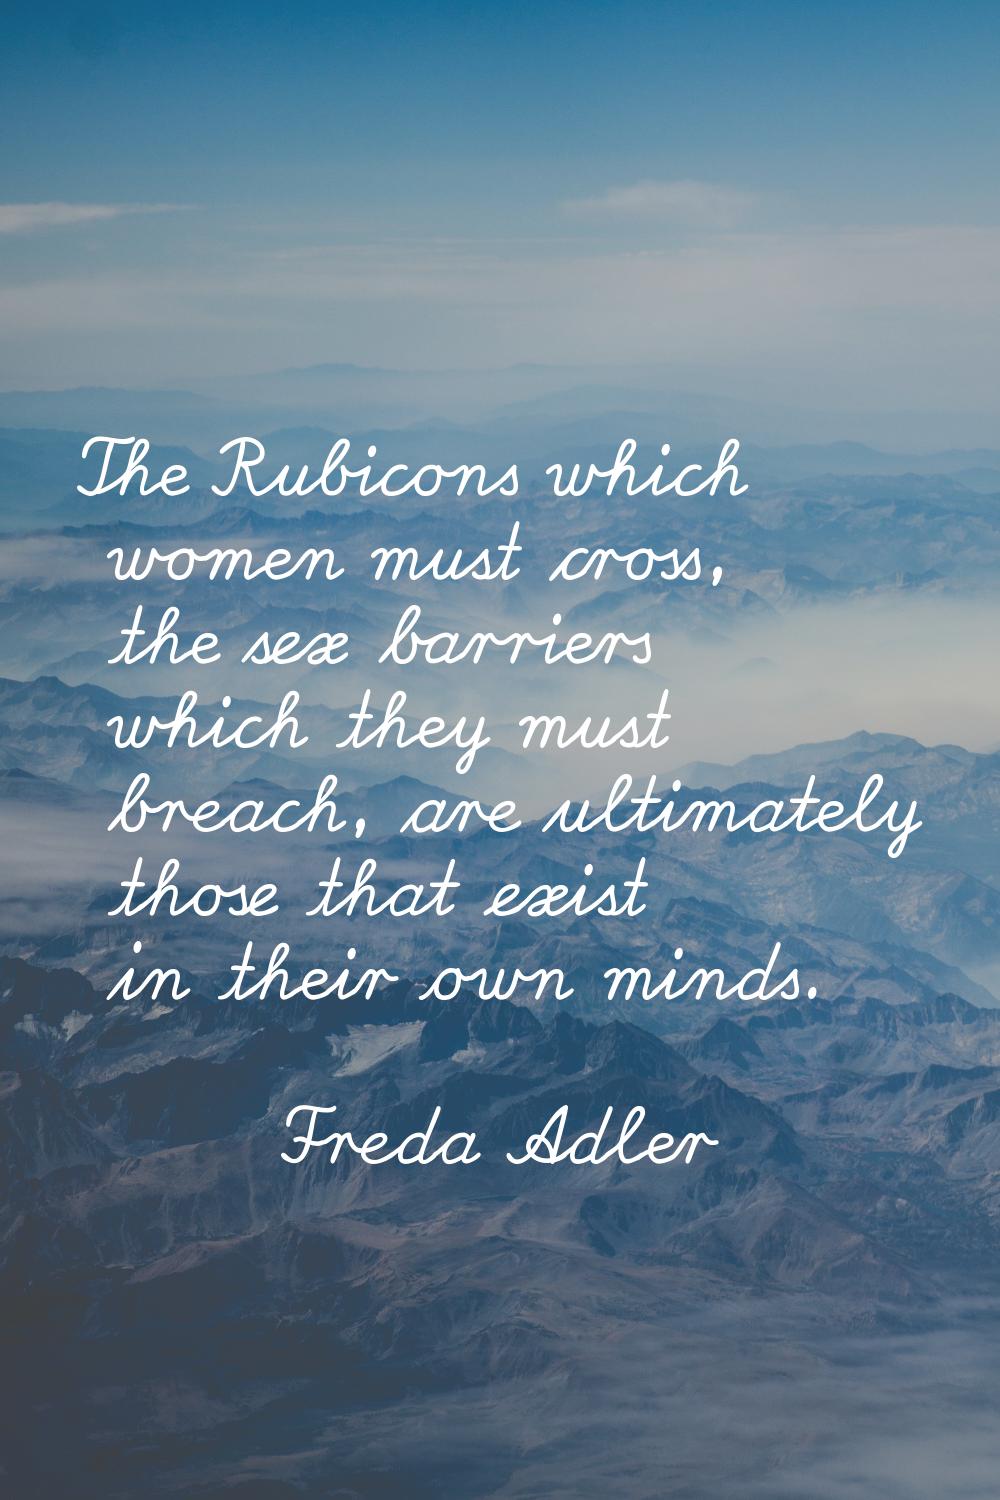 The Rubicons which women must cross, the sex barriers which they must breach, are ultimately those 